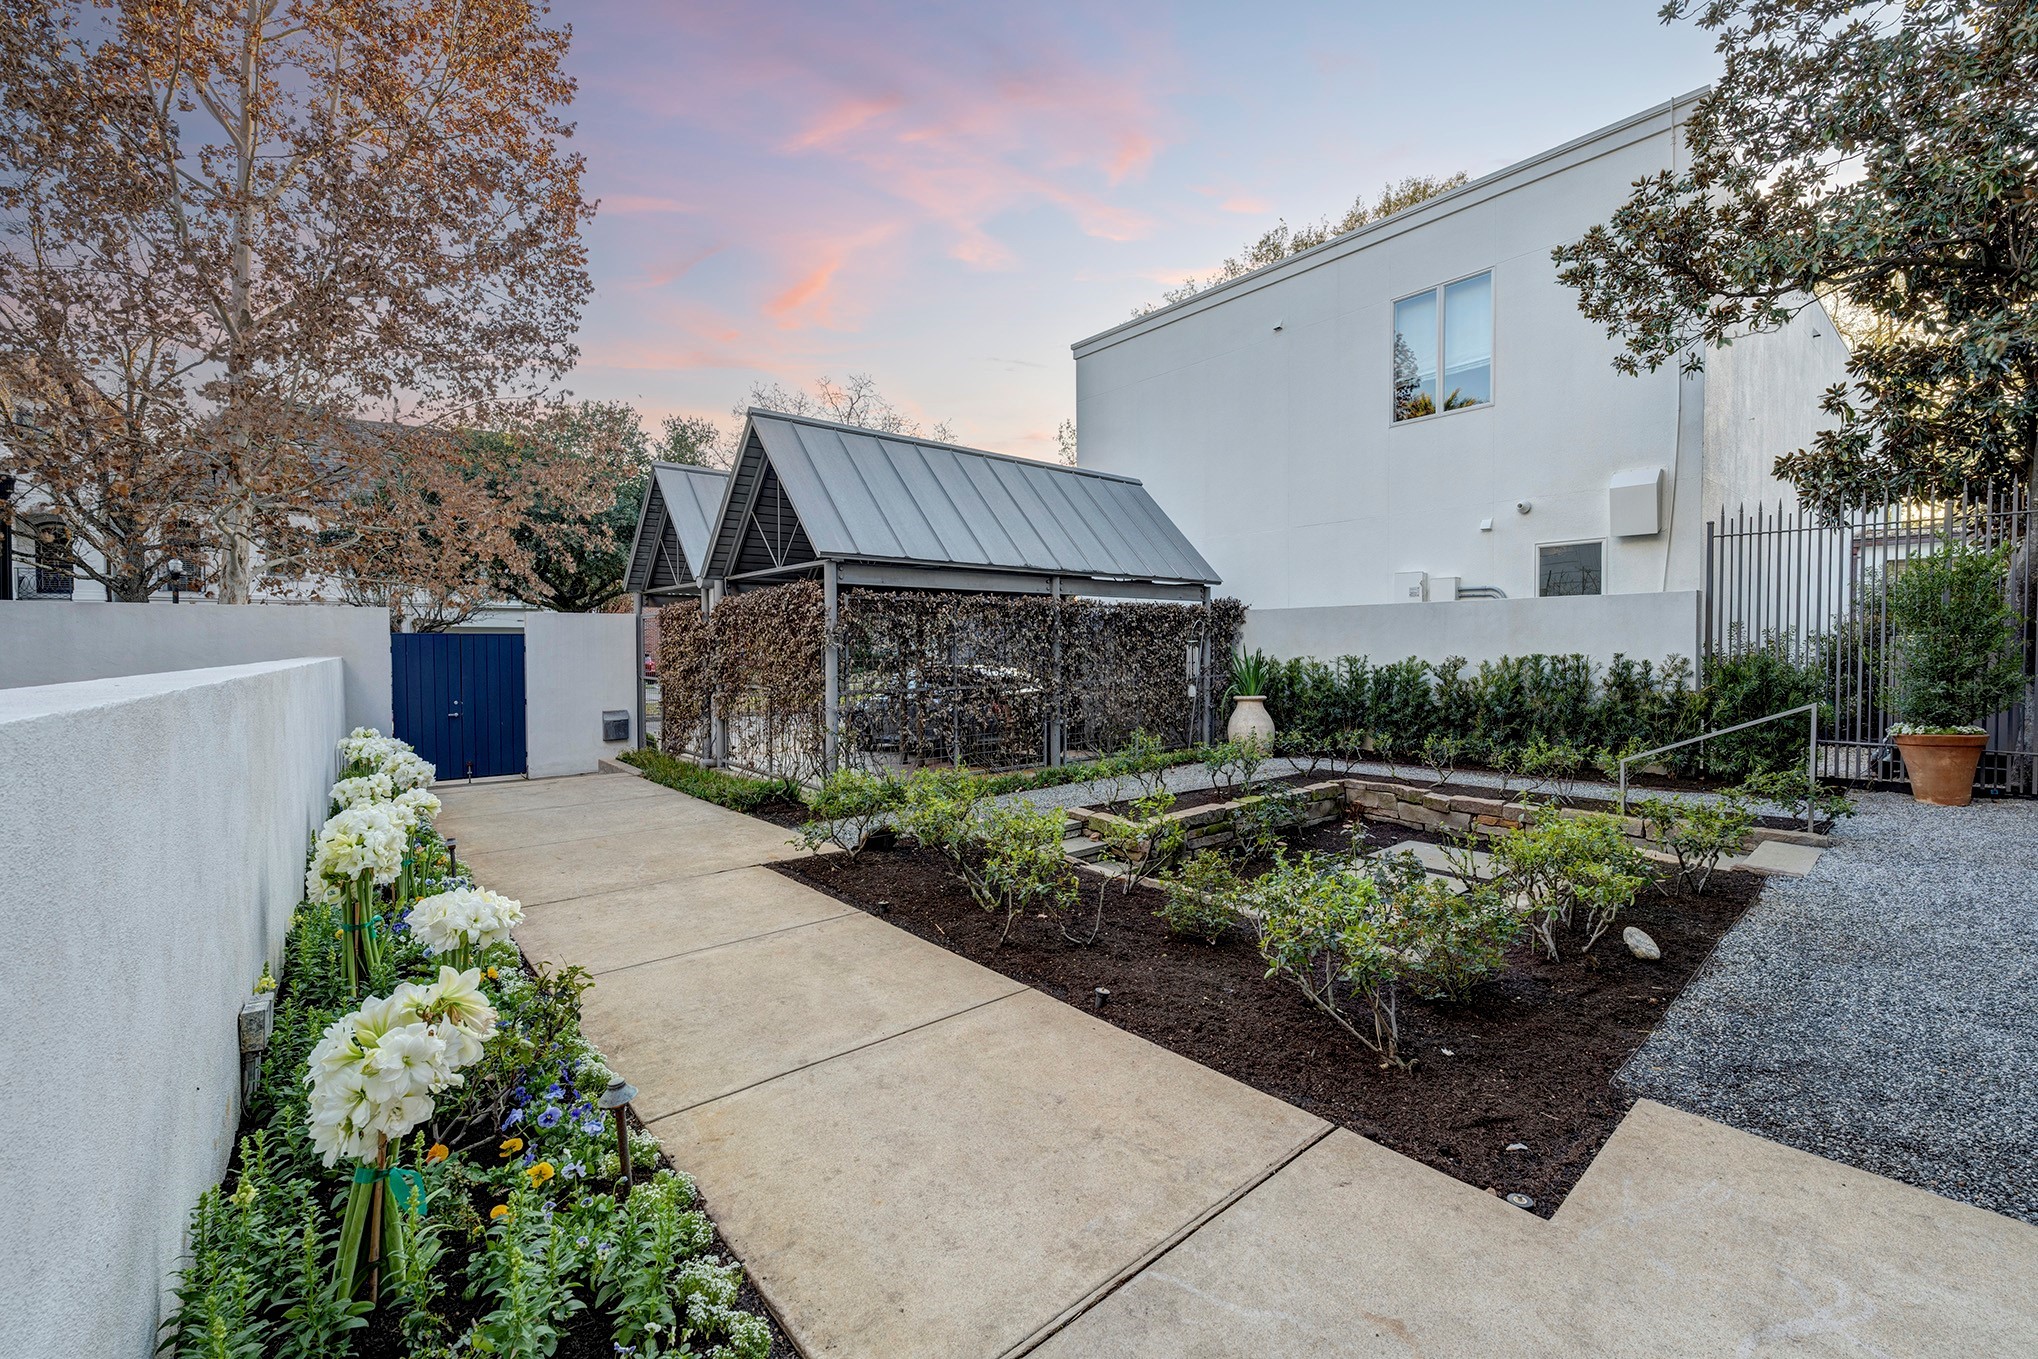 Professionally landscaped yard with sunken rose garden is a piece of natural art.